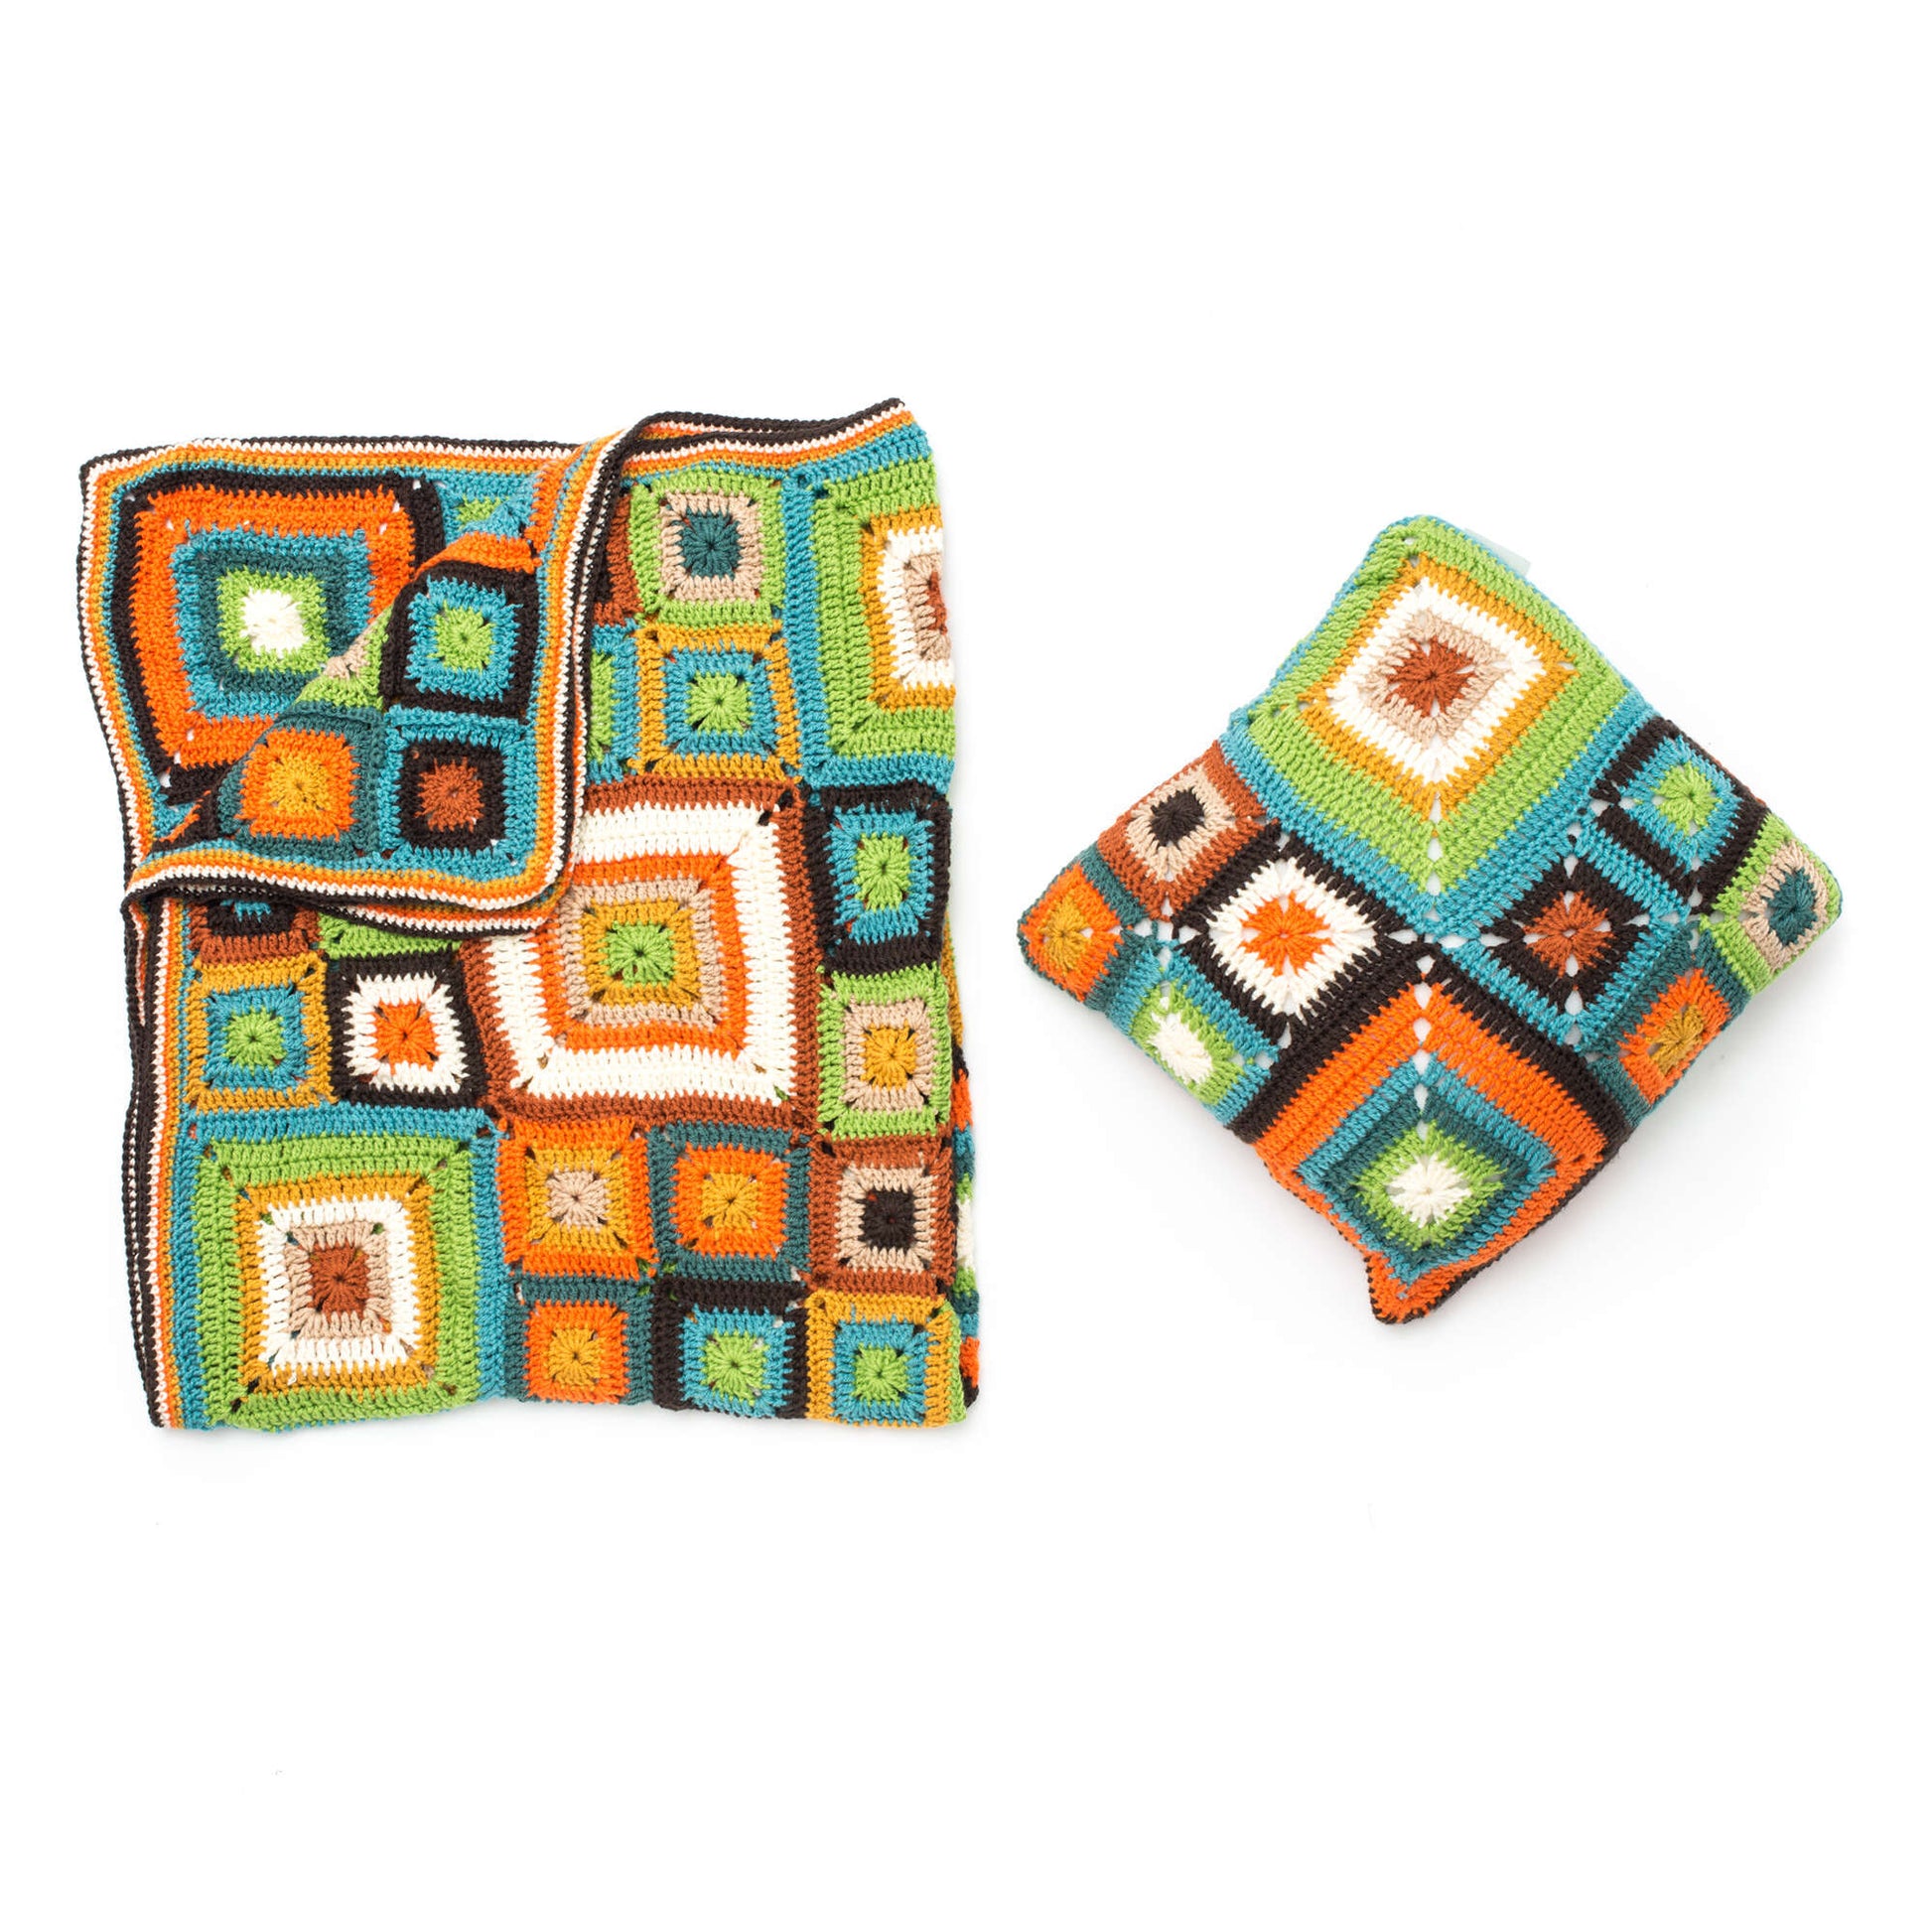 Free Patons Bright Squares Crochet Blanket And Pillow Set Pattern